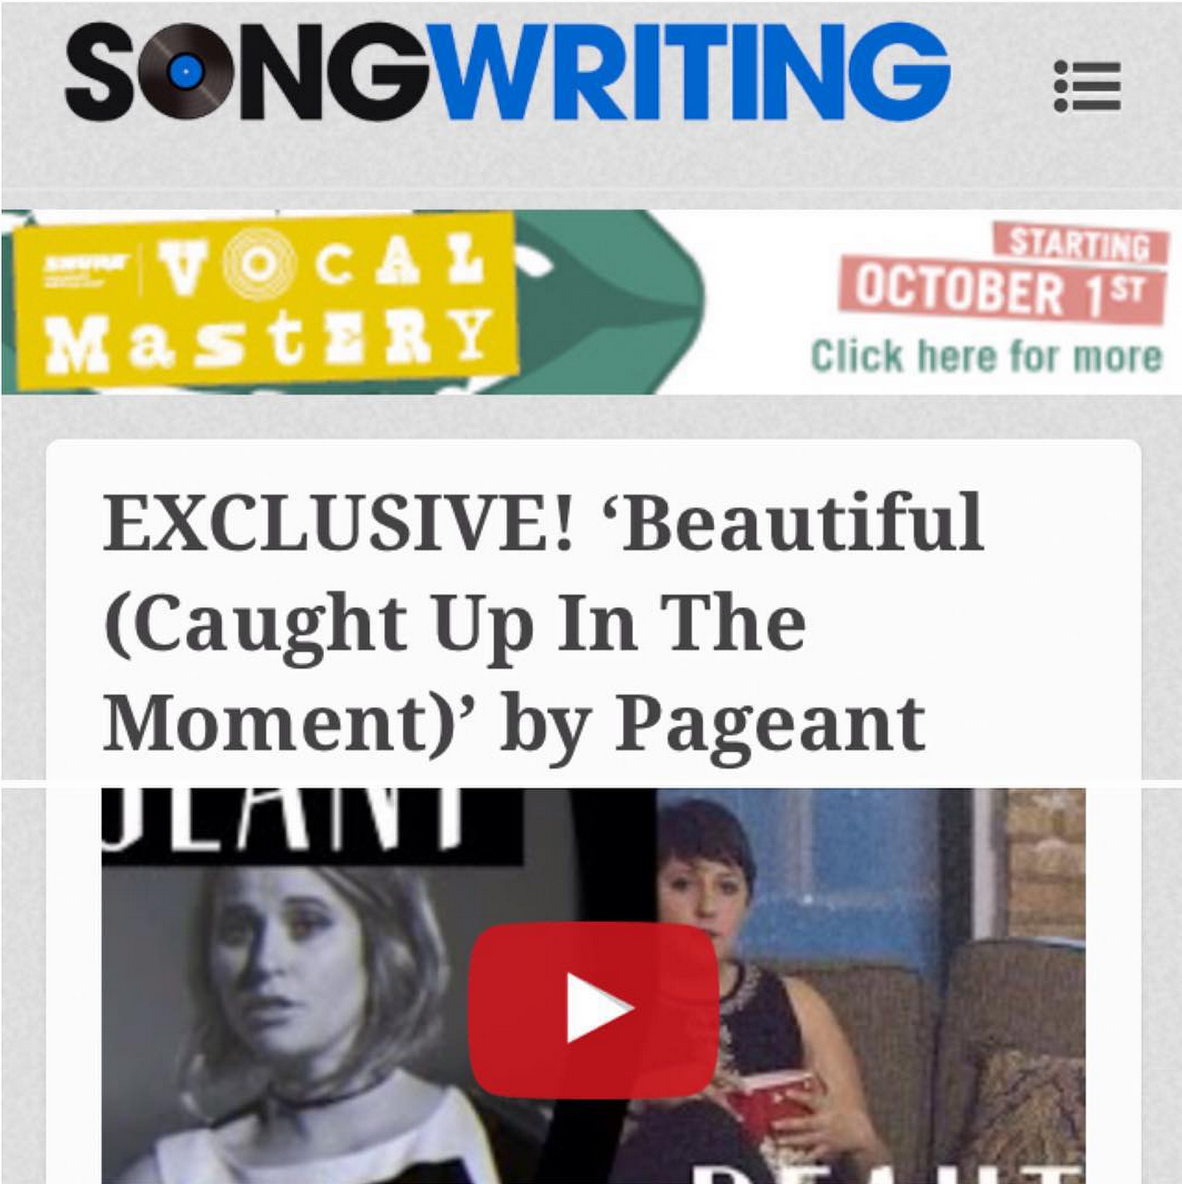 Songwriting Magazine "EXCLUSIVE! 'Beautiful (Caught Up in the Moment)' by Pageant" Oct 12, 2015